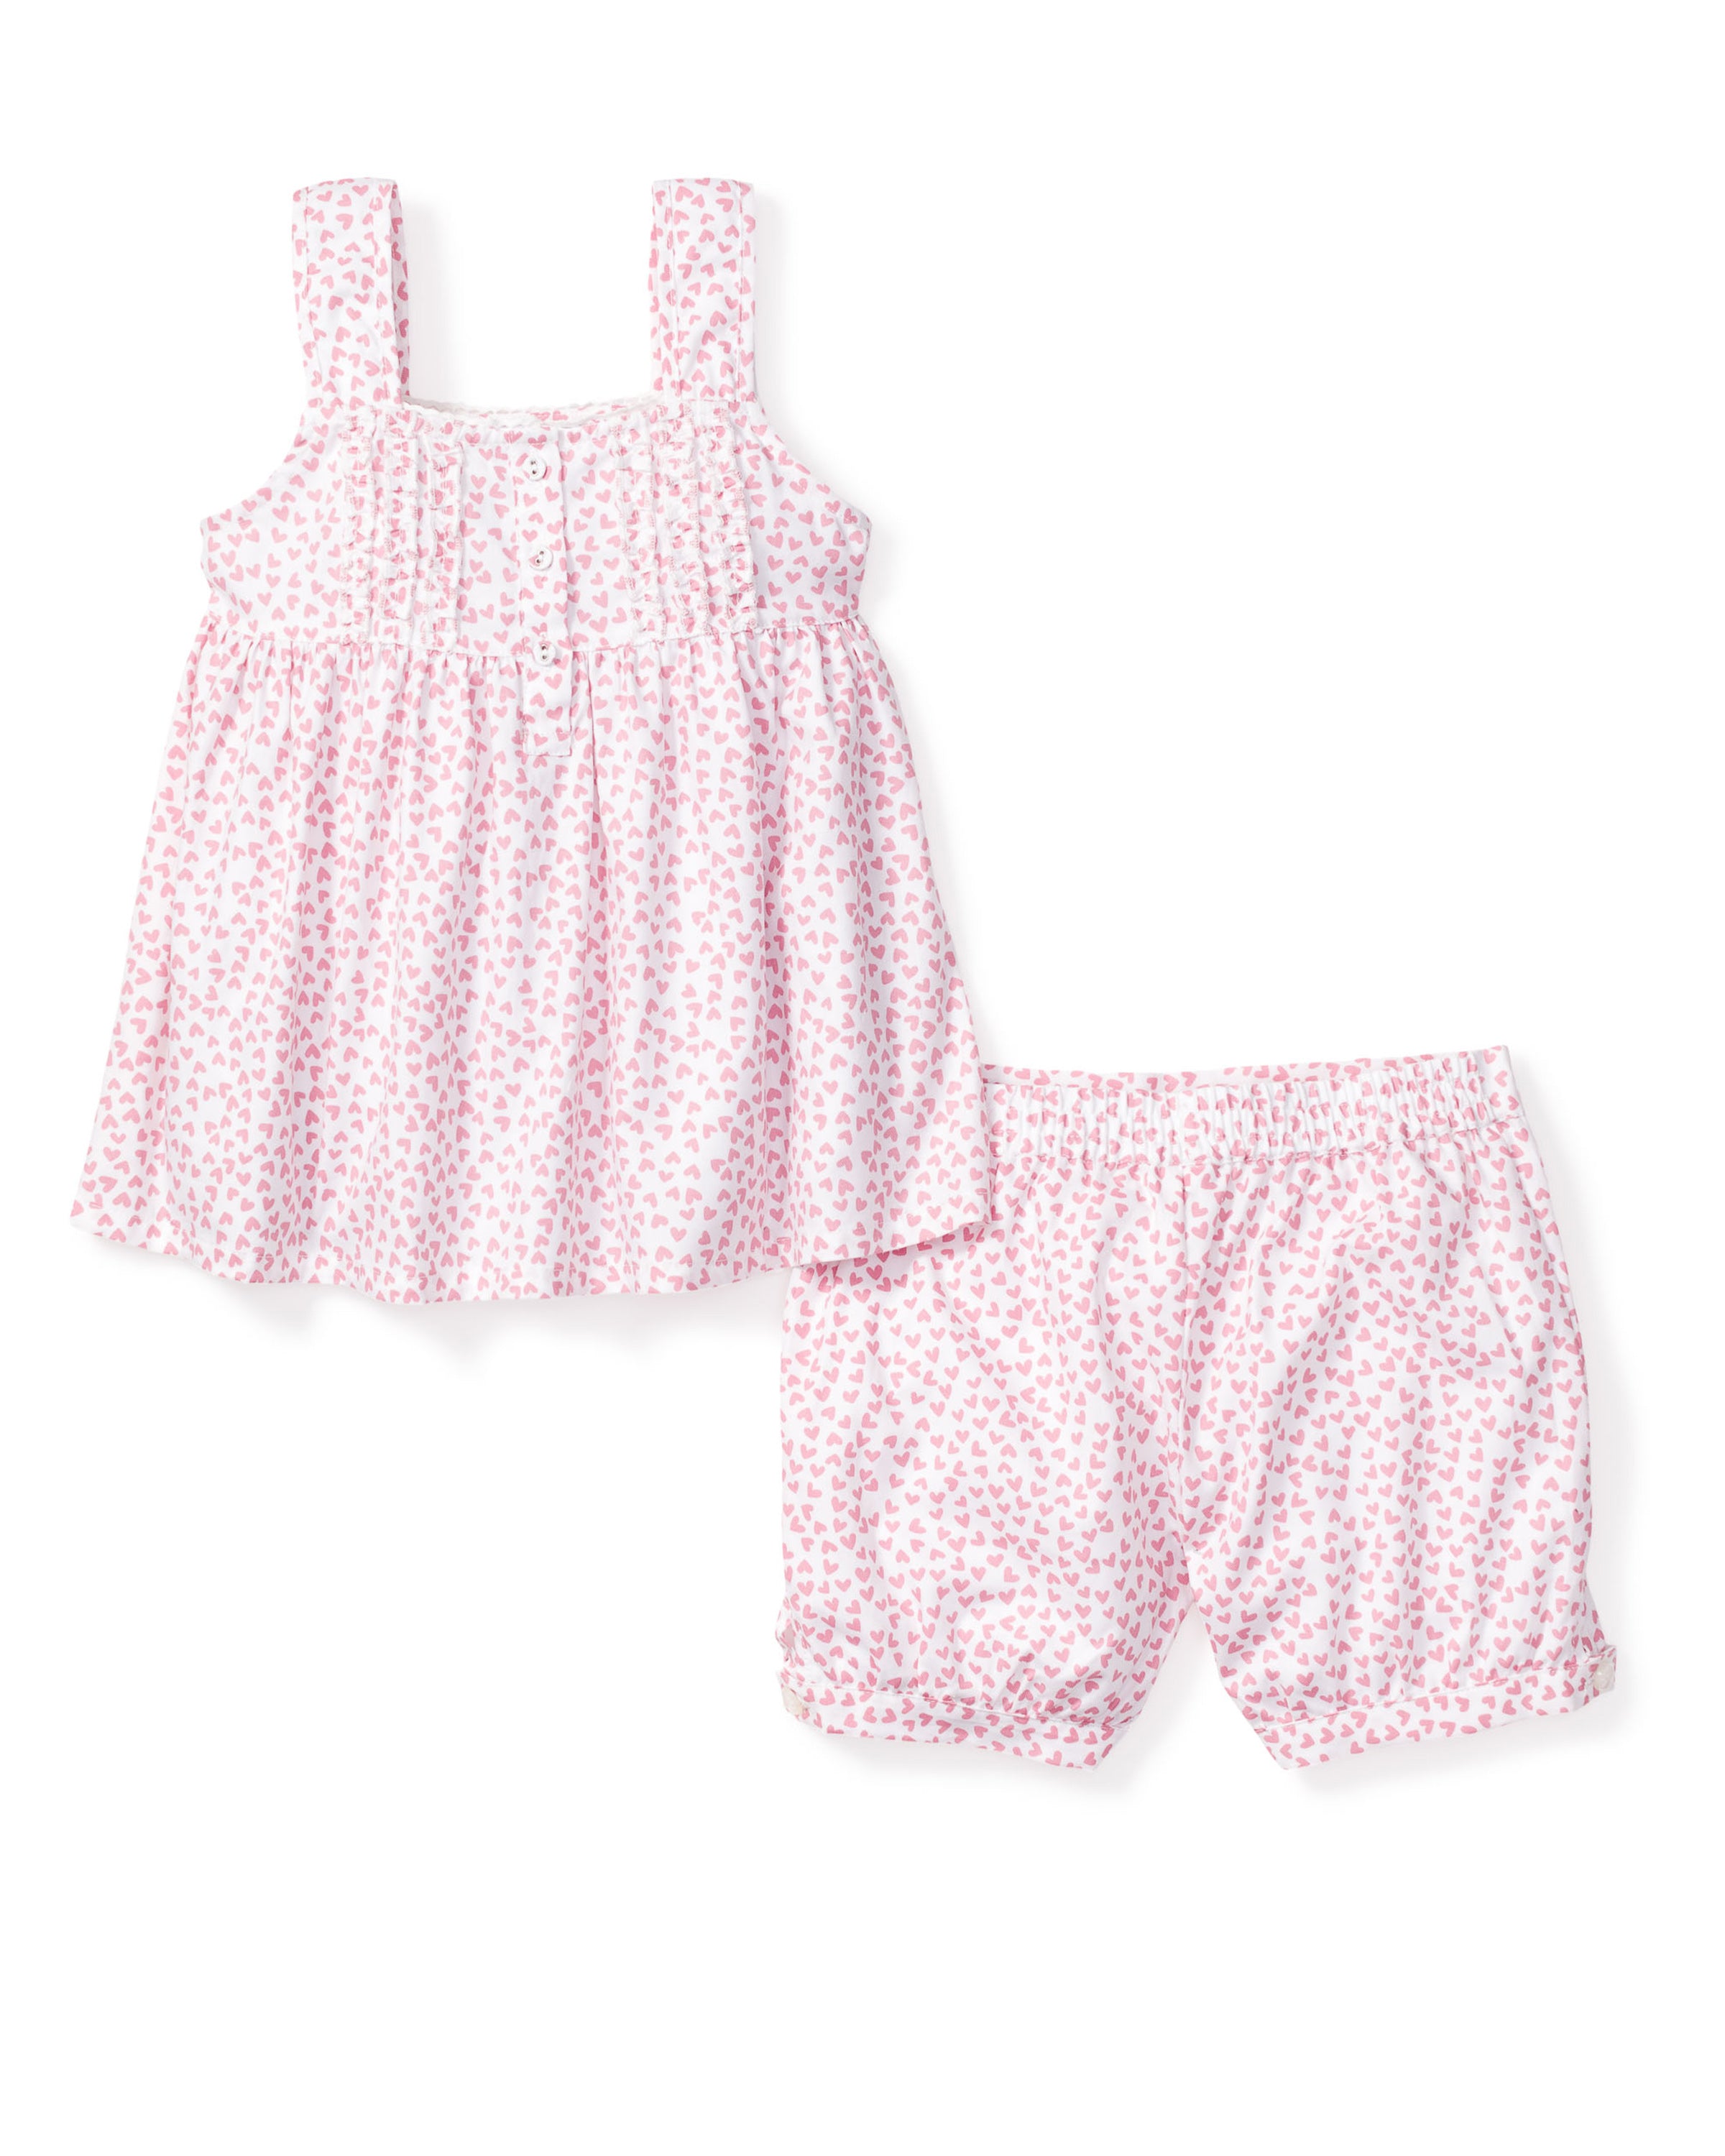 Girl's Twill Charlotte Short Set in Sweethearts